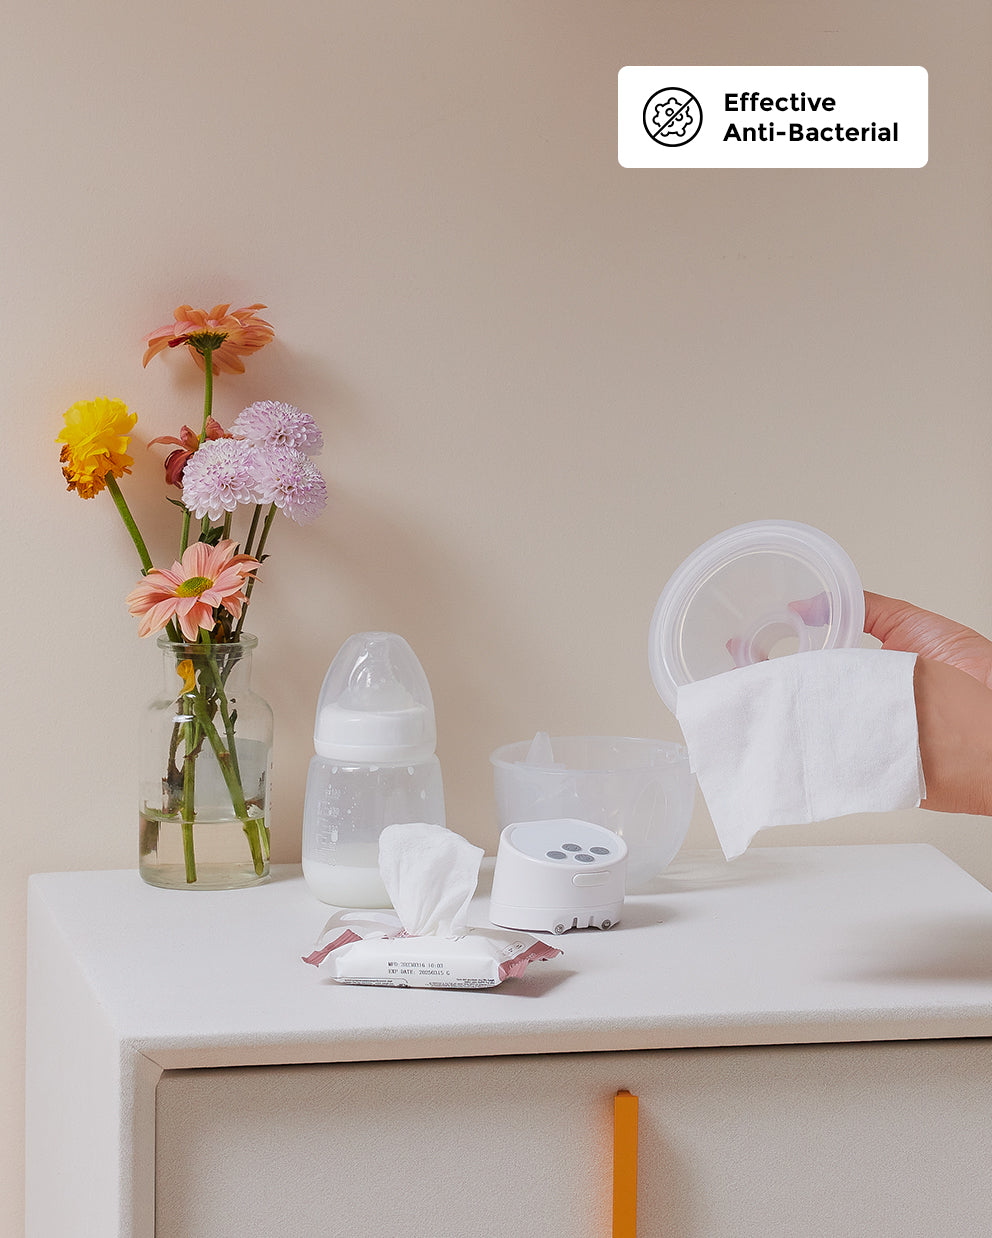 Seriously Clean Breast Pump Wipes